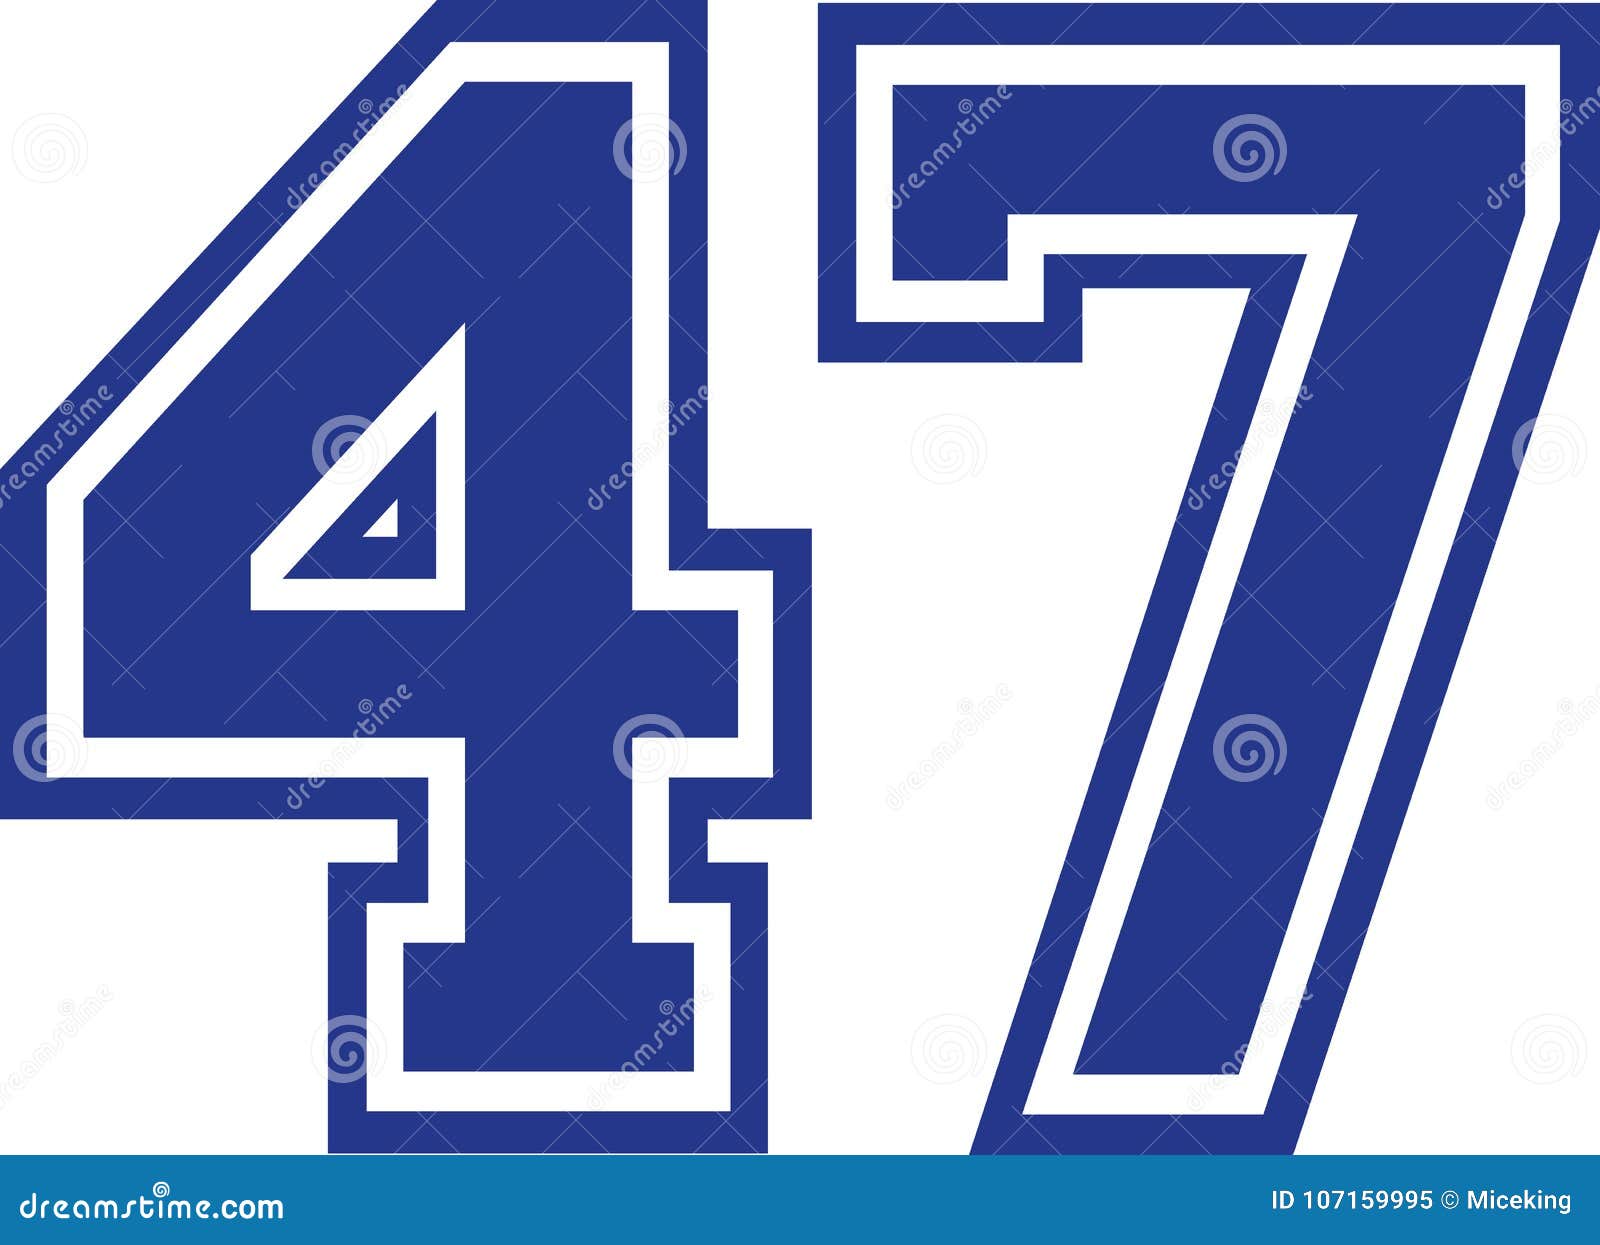 Forty-seven College Number 47 Stock Vector - Illustration of